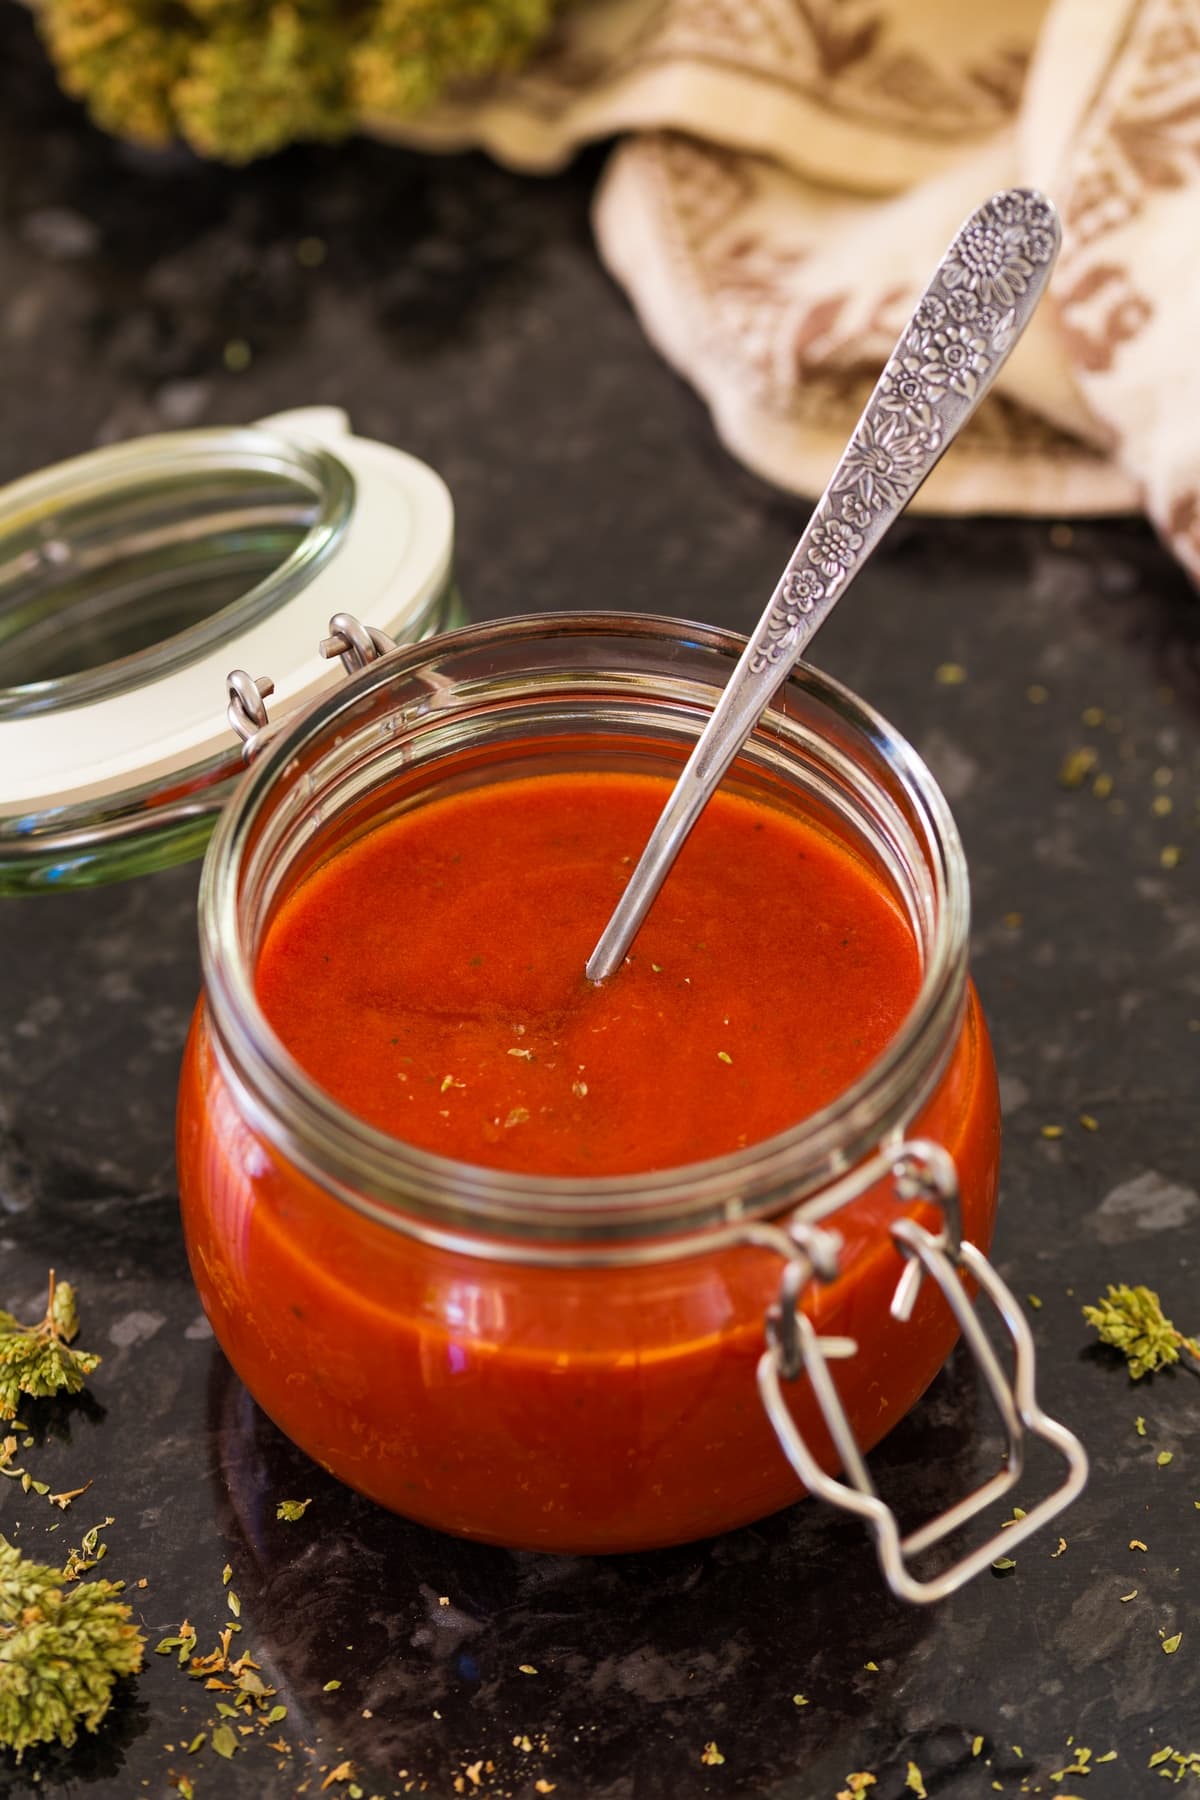 Authentic tomato sauce for pizza in a glass jar.